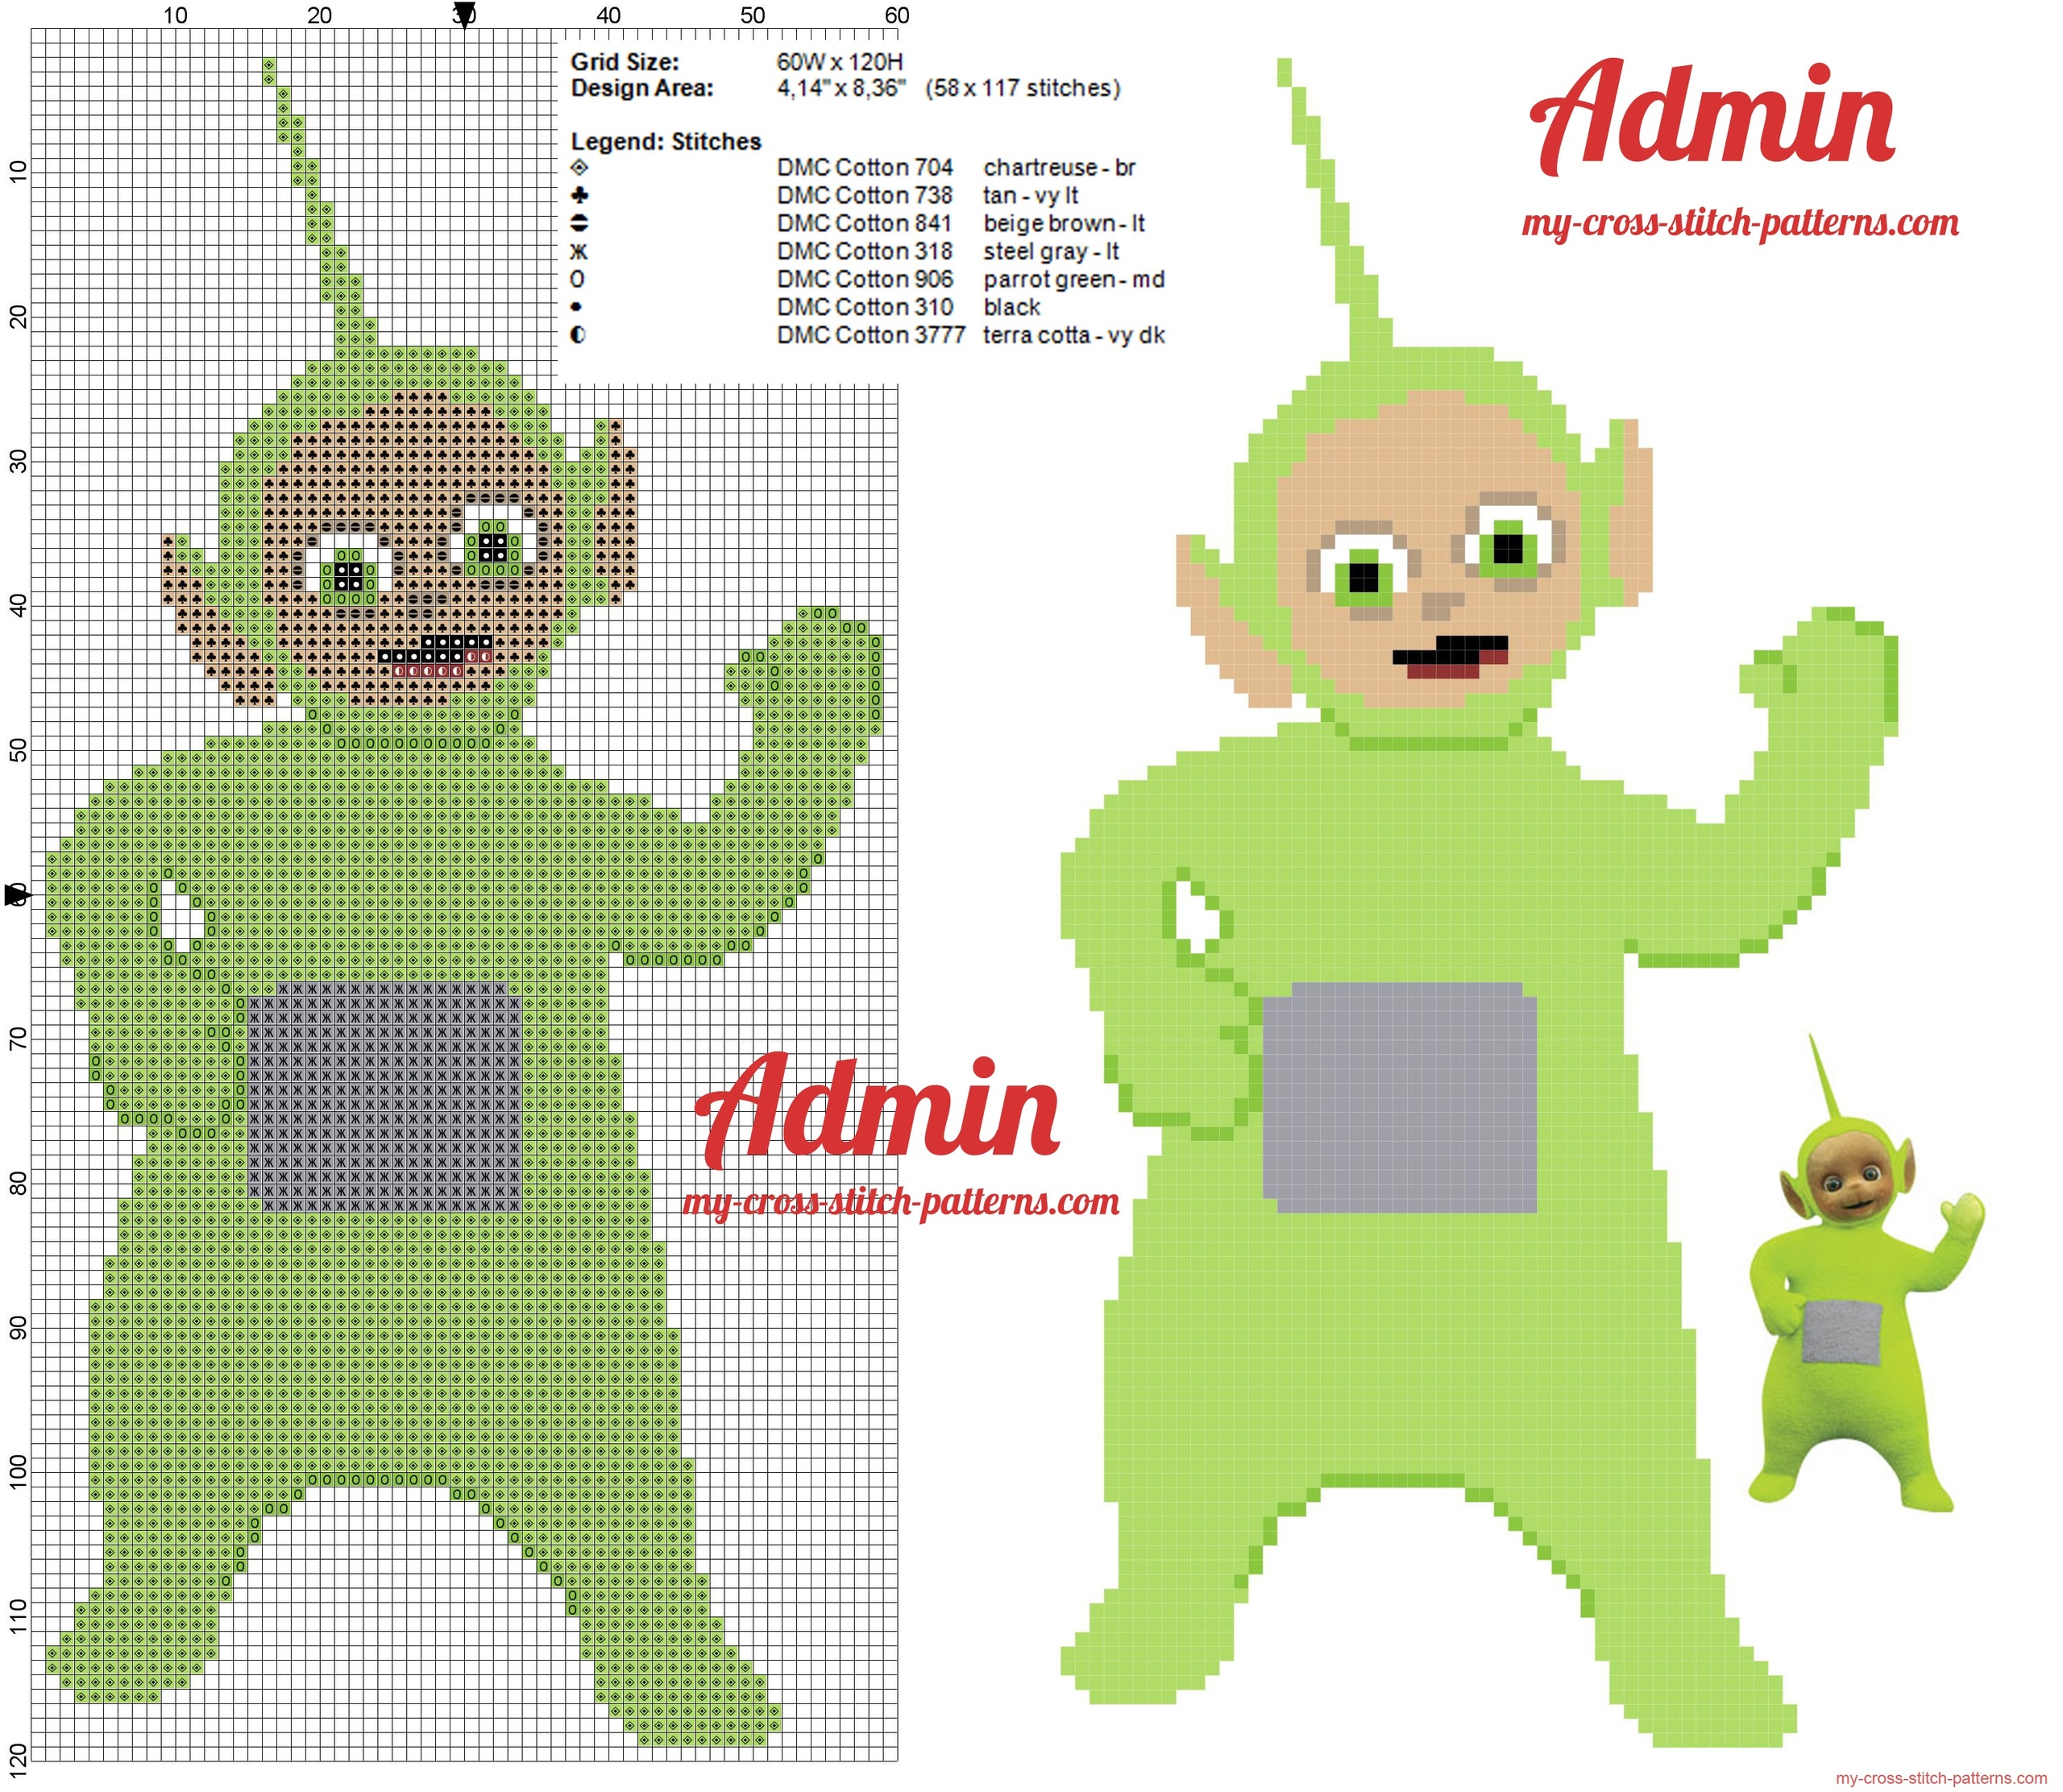 dipsy_the_green_teletubbies_cross_stitch_pattern_free